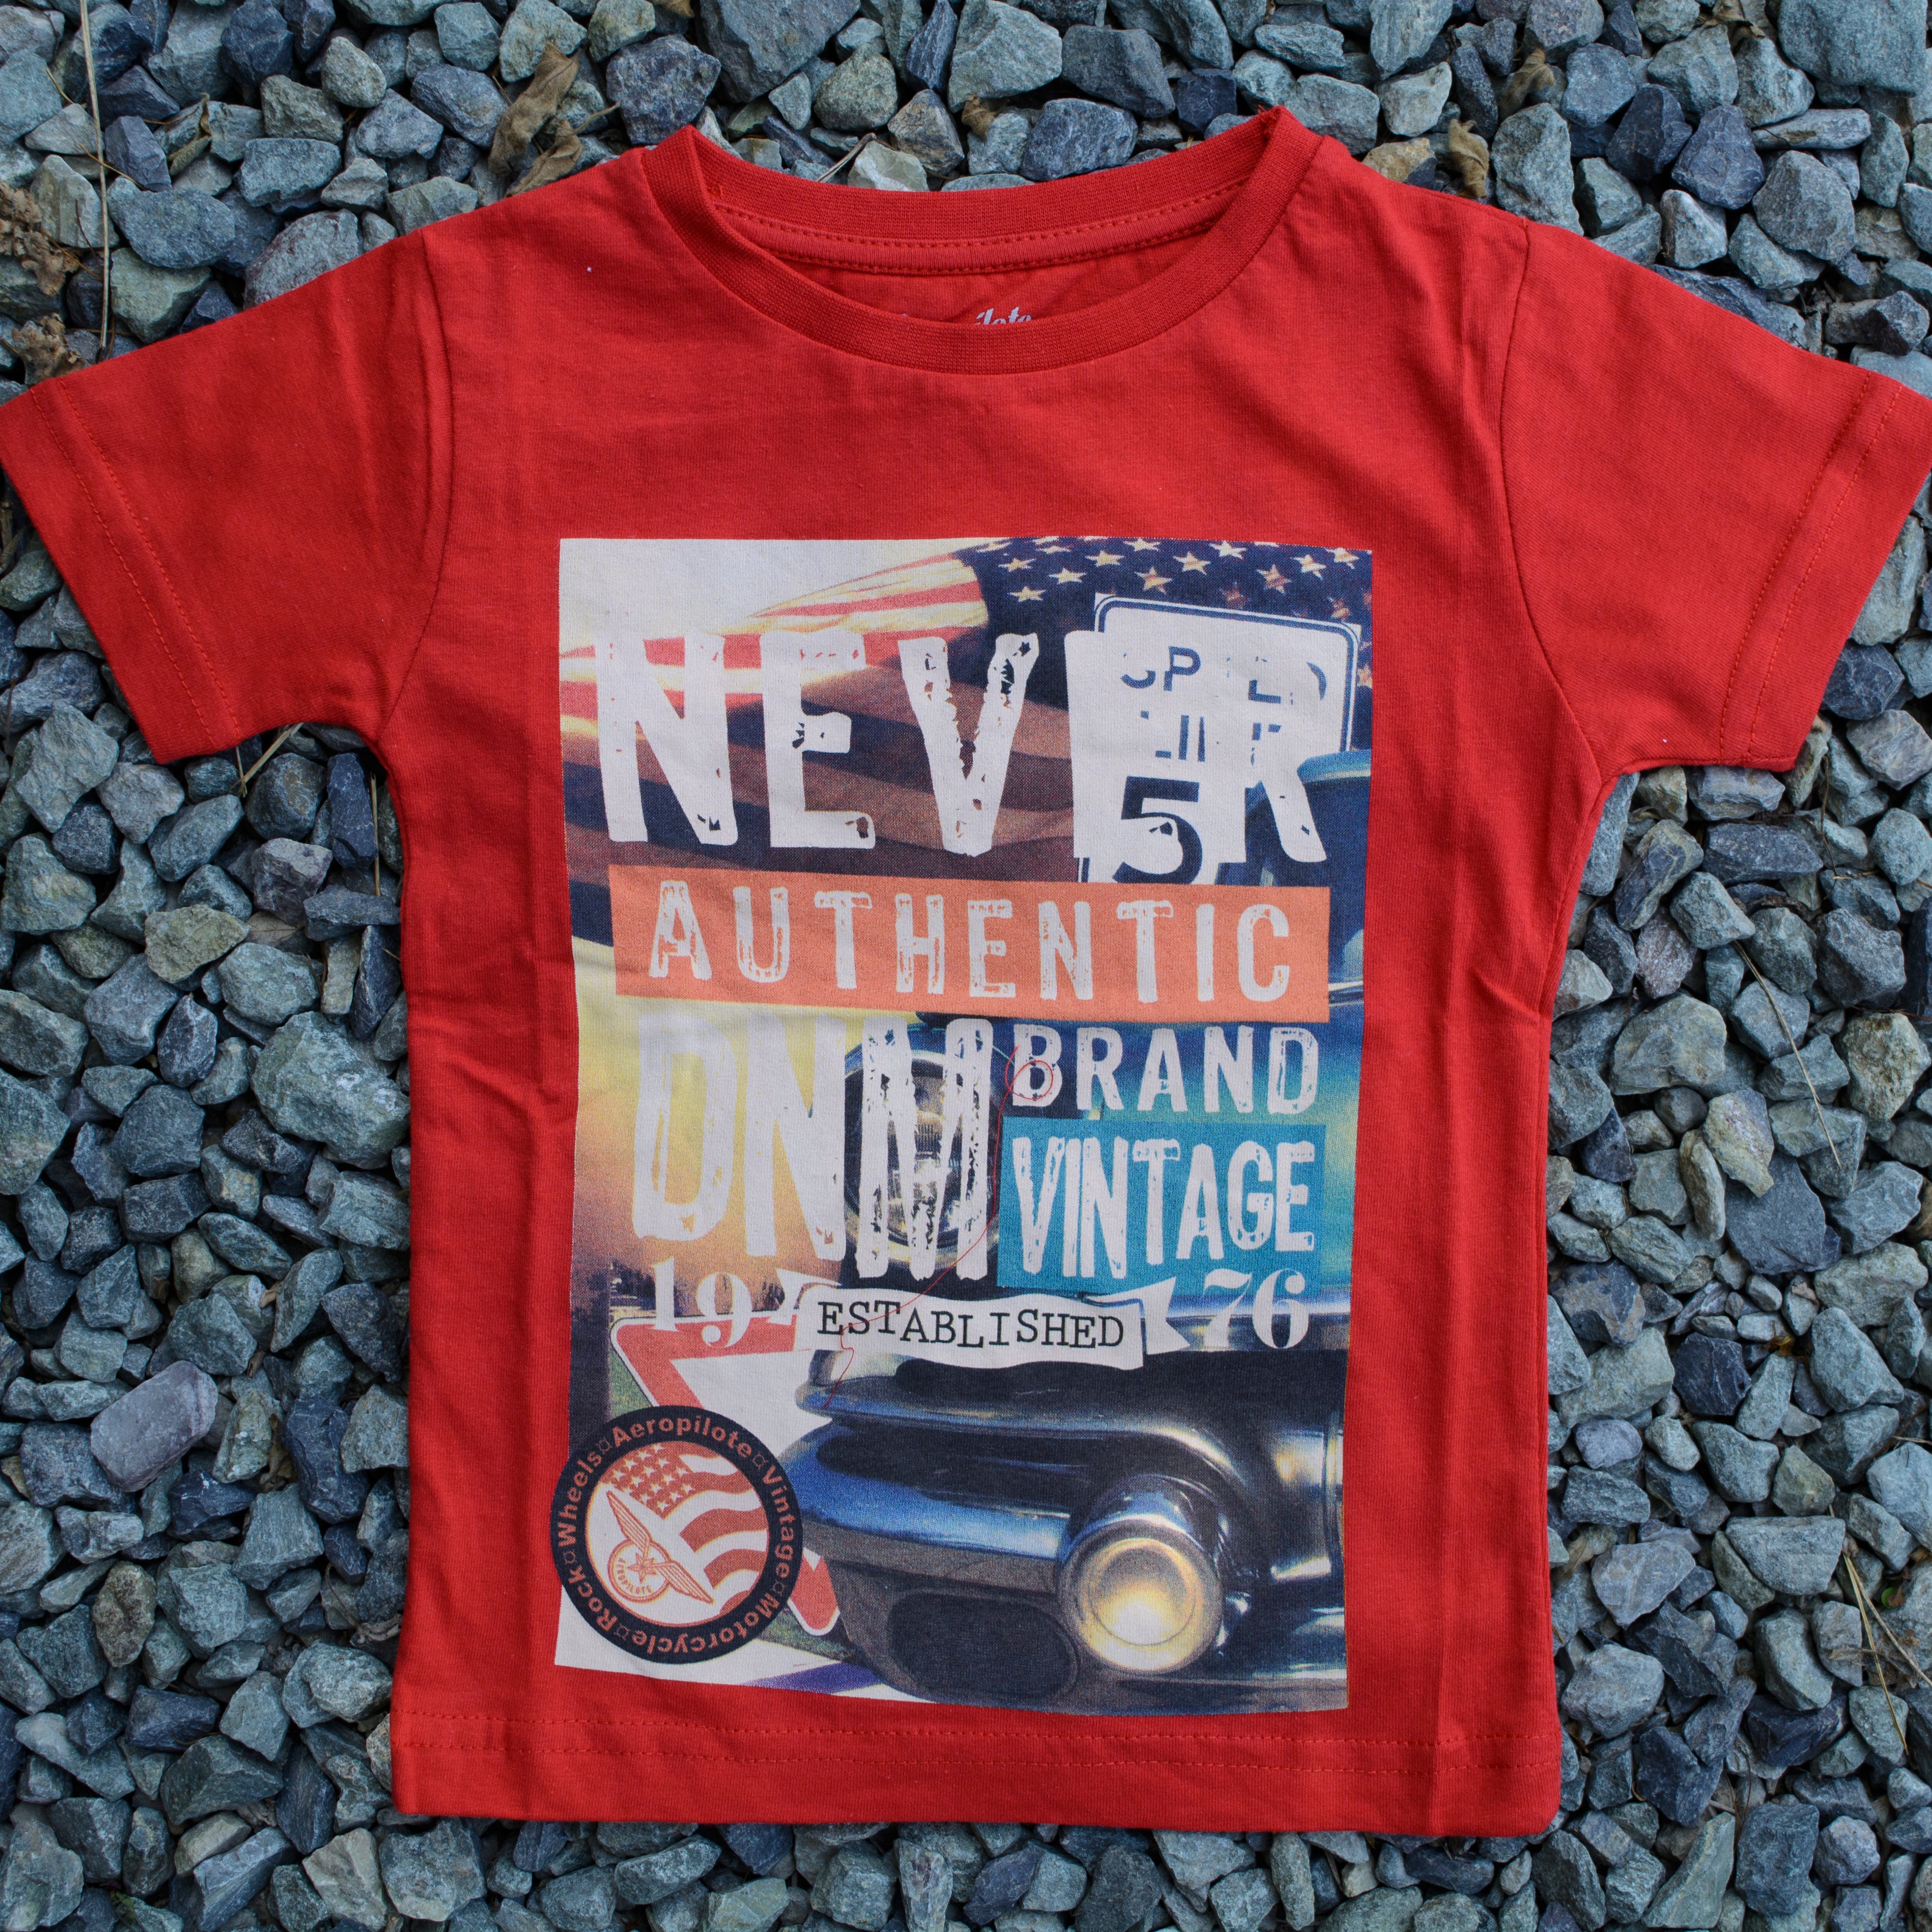 Never - Crew Neck Cotton T-Shirts for Children's - Gift for Son and Daughters - Color White & Red - Wear Sierra